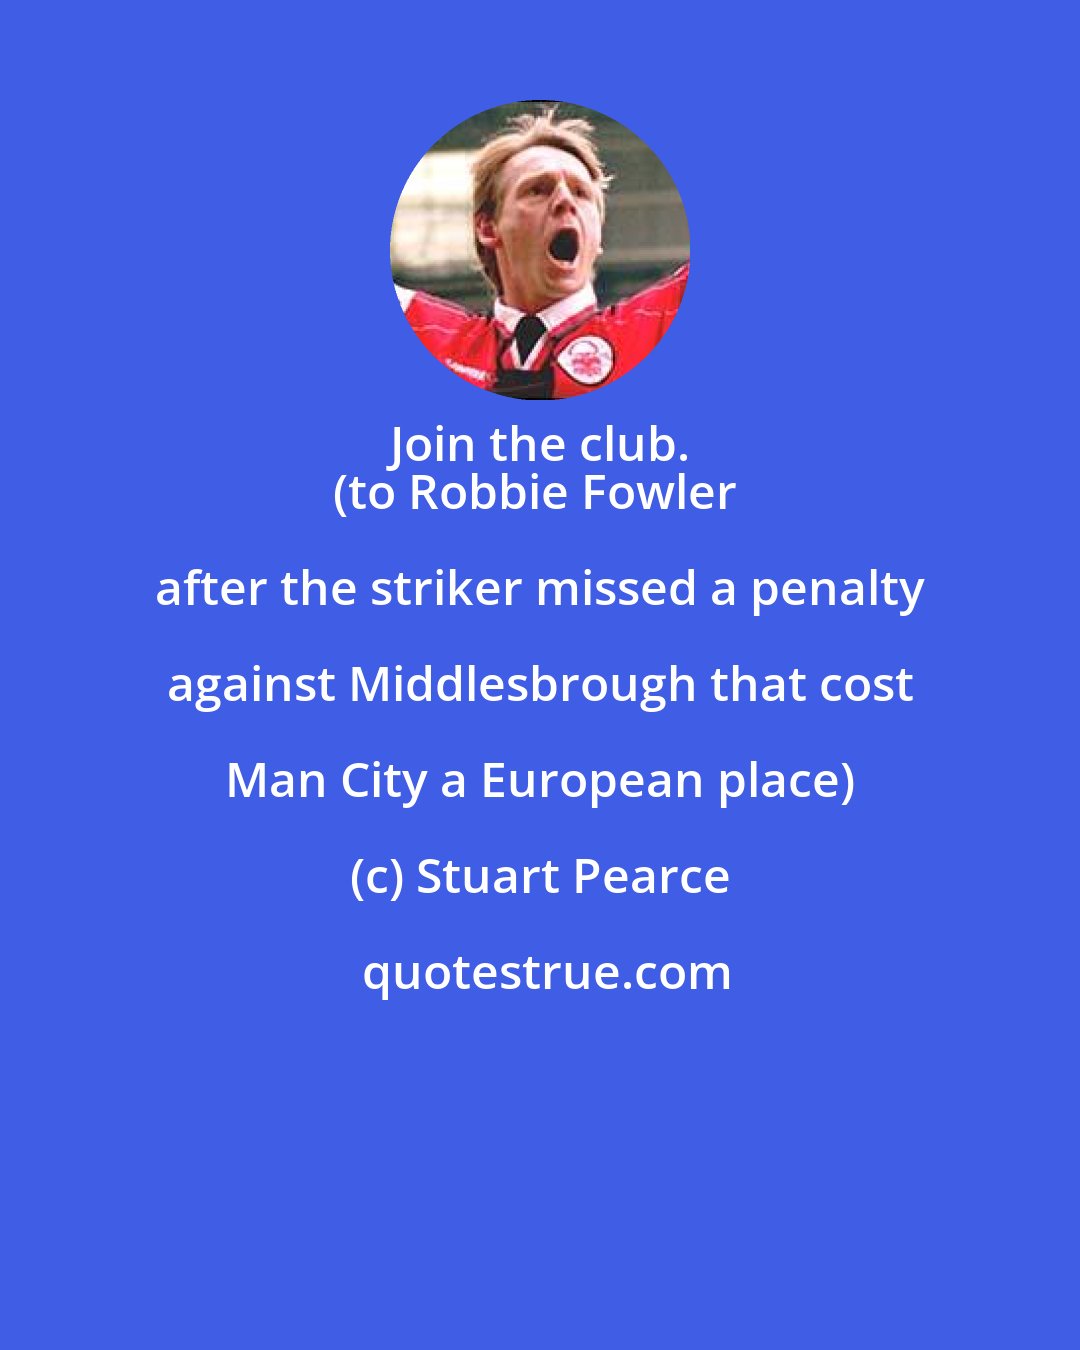 Stuart Pearce: Join the club. 
(to Robbie Fowler after the striker missed a penalty against Middlesbrough that cost Man City a European place)